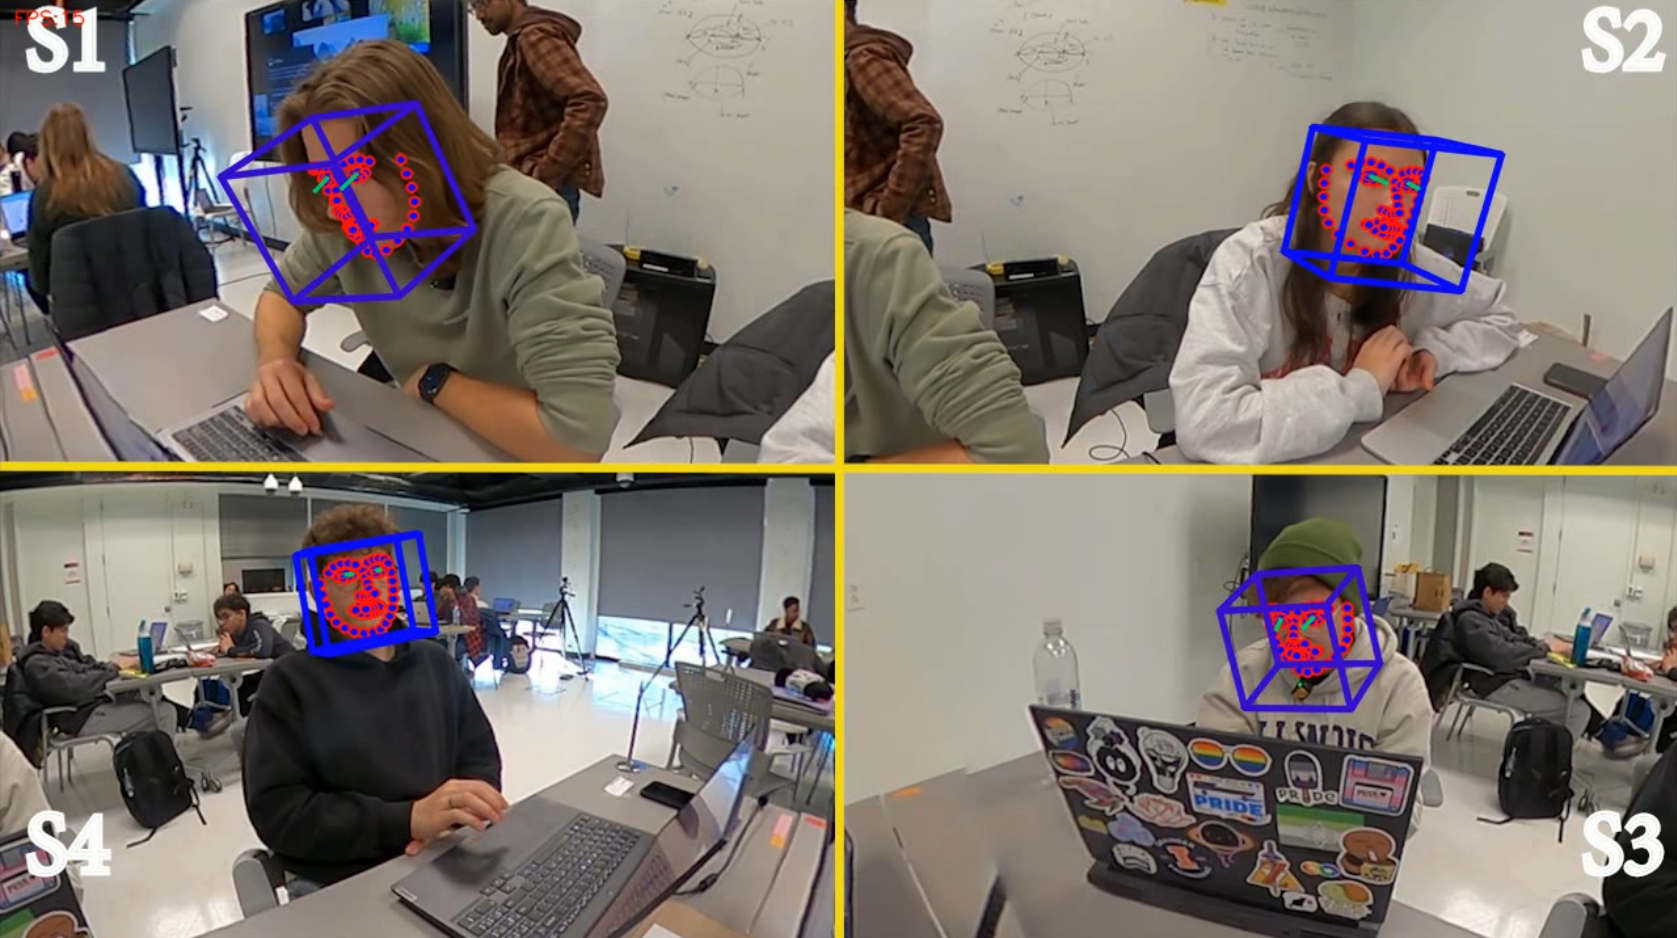 An image showing the 3 camera views (FV vs TDV vs TV). This photo showcase OpenFace's Face Mode capture. The top left image outlines each students' facial landmarks and eye gaze for face view.